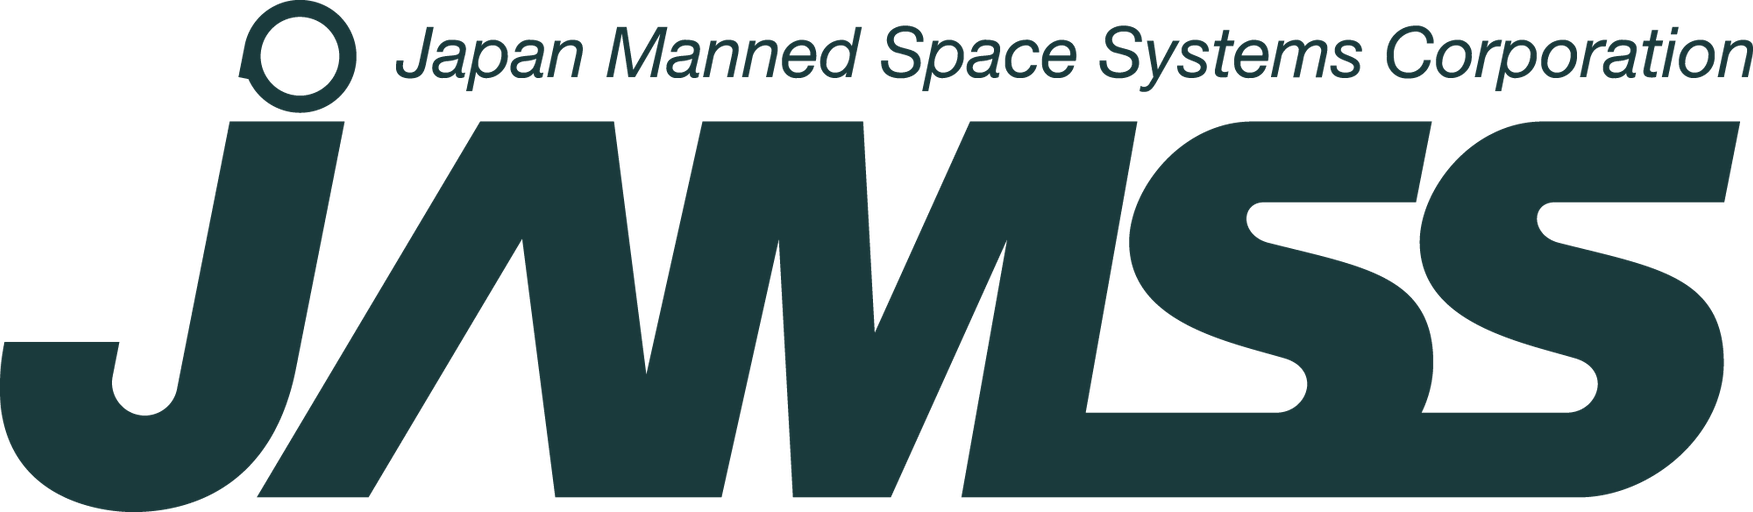 JAMSS (Japan Manned Space Systems Corporation)